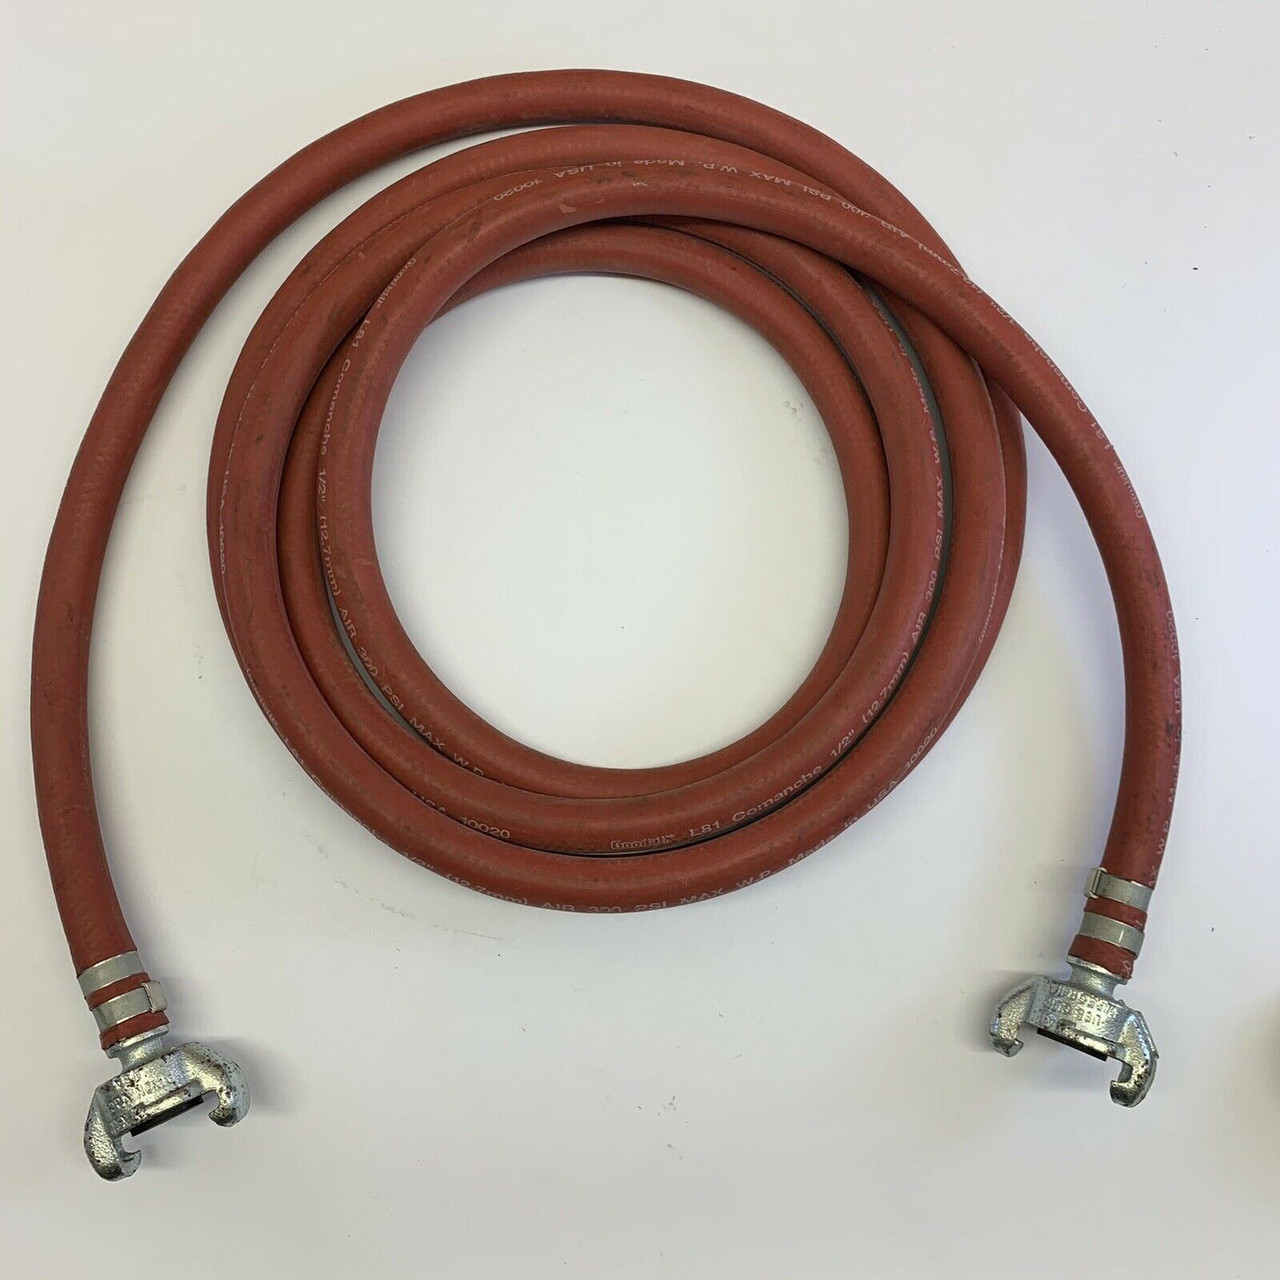 15 ft Air Hose with Gladhand Connectors 300 PSI Max